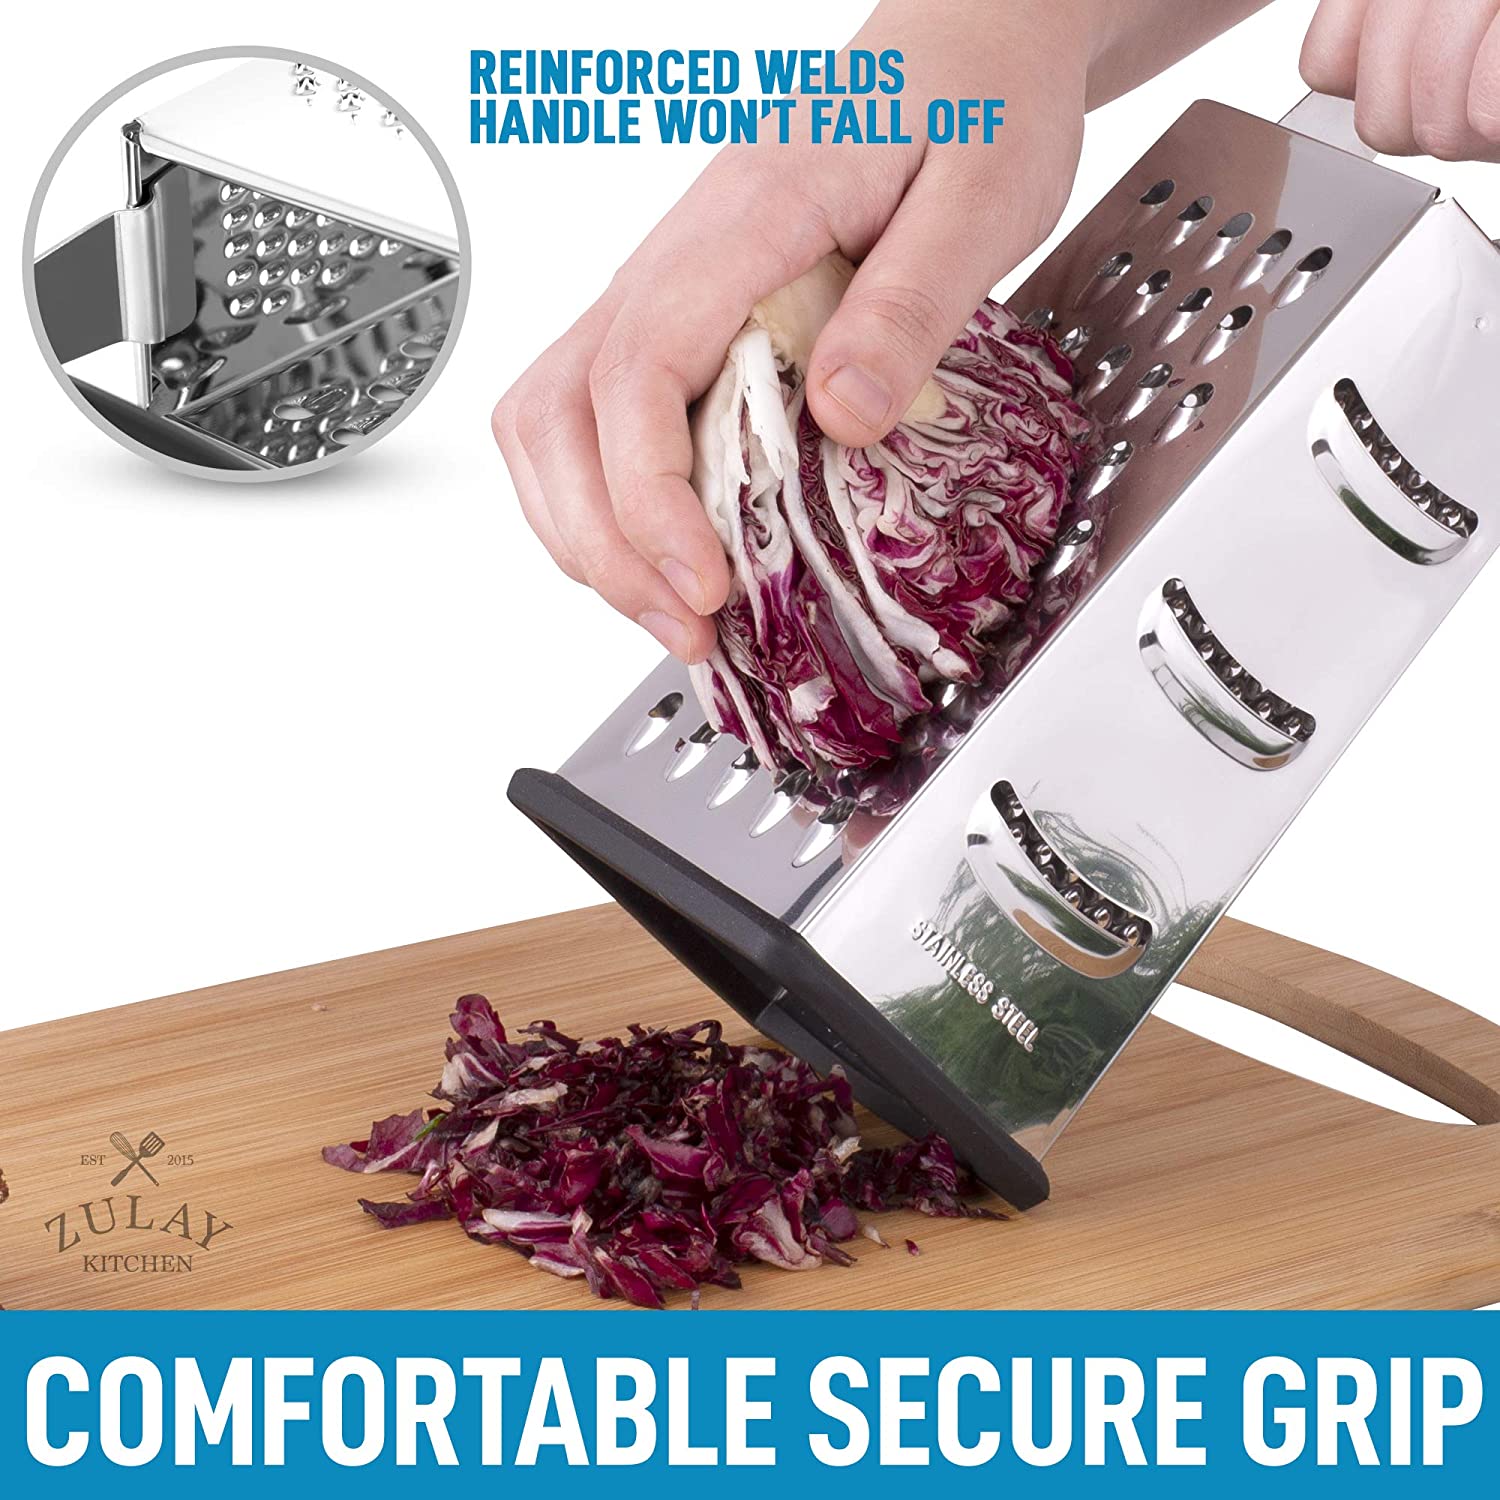 Zulay Kitchen Professional Stainless Steel Flat Handheld Cheese Grater -  Black 